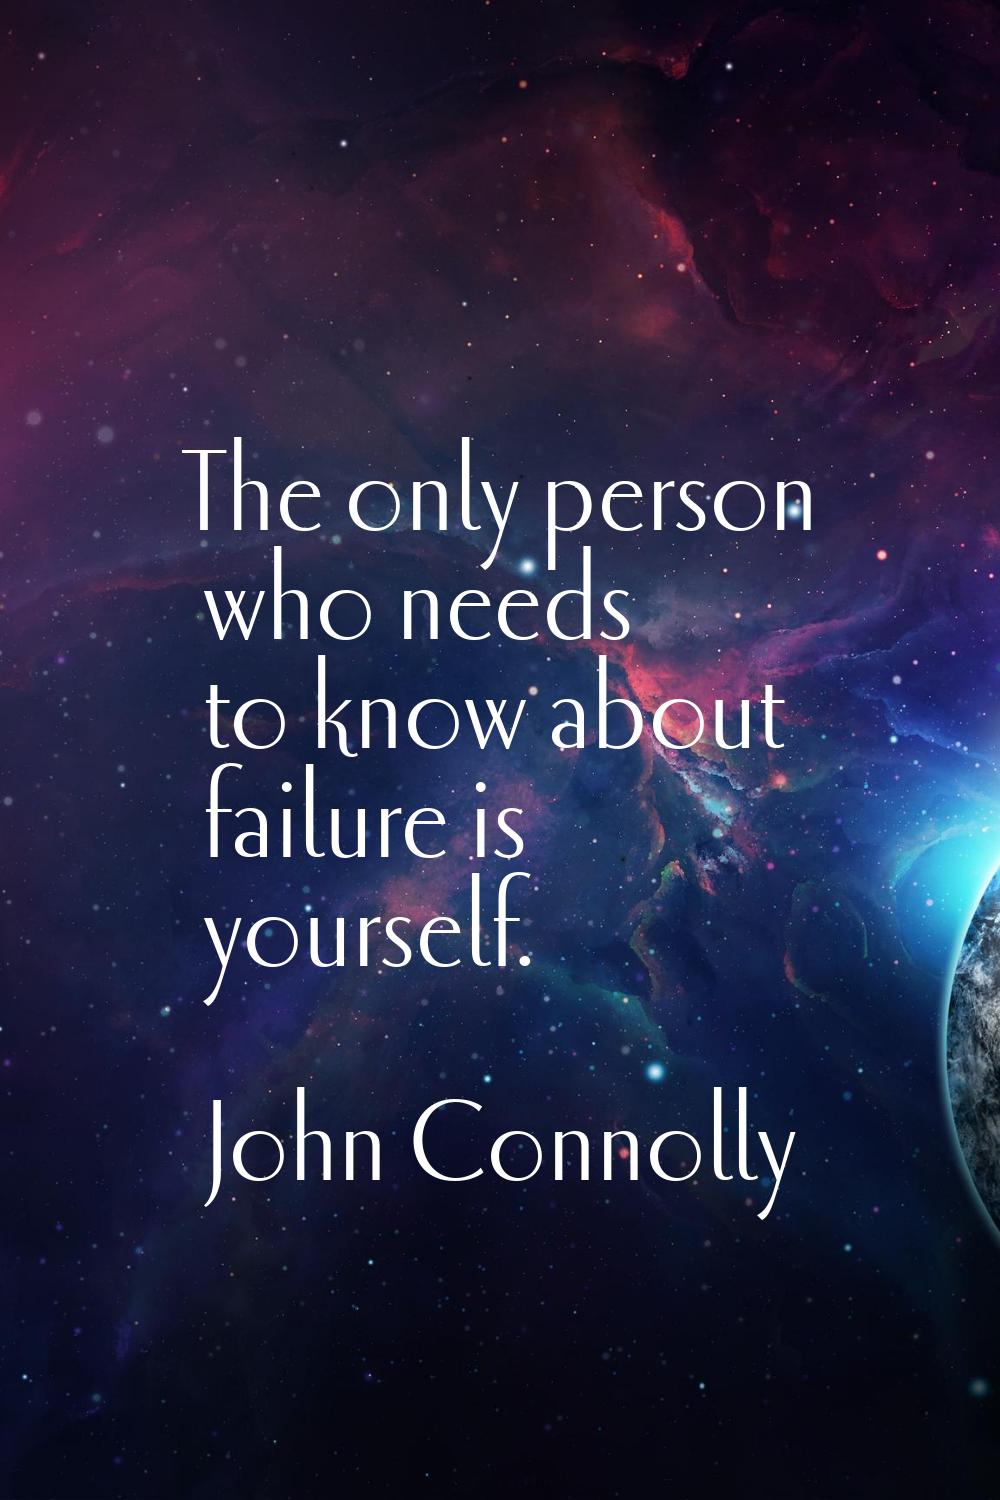 The only person who needs to know about failure is yourself.